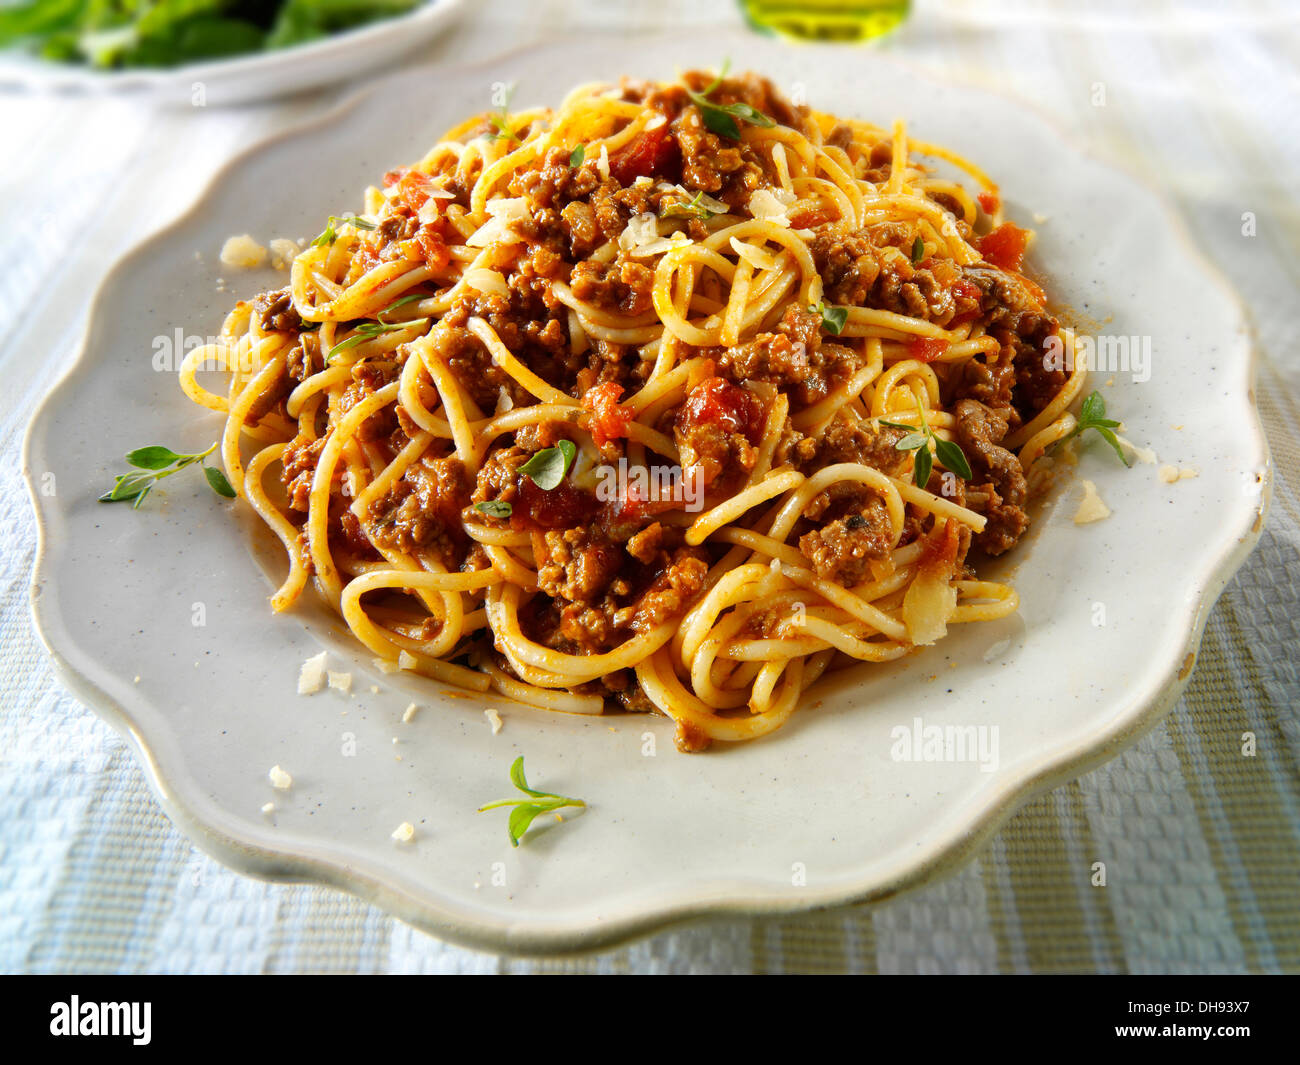 spaghetti pasta with a Bolognese sauce Stock Photo